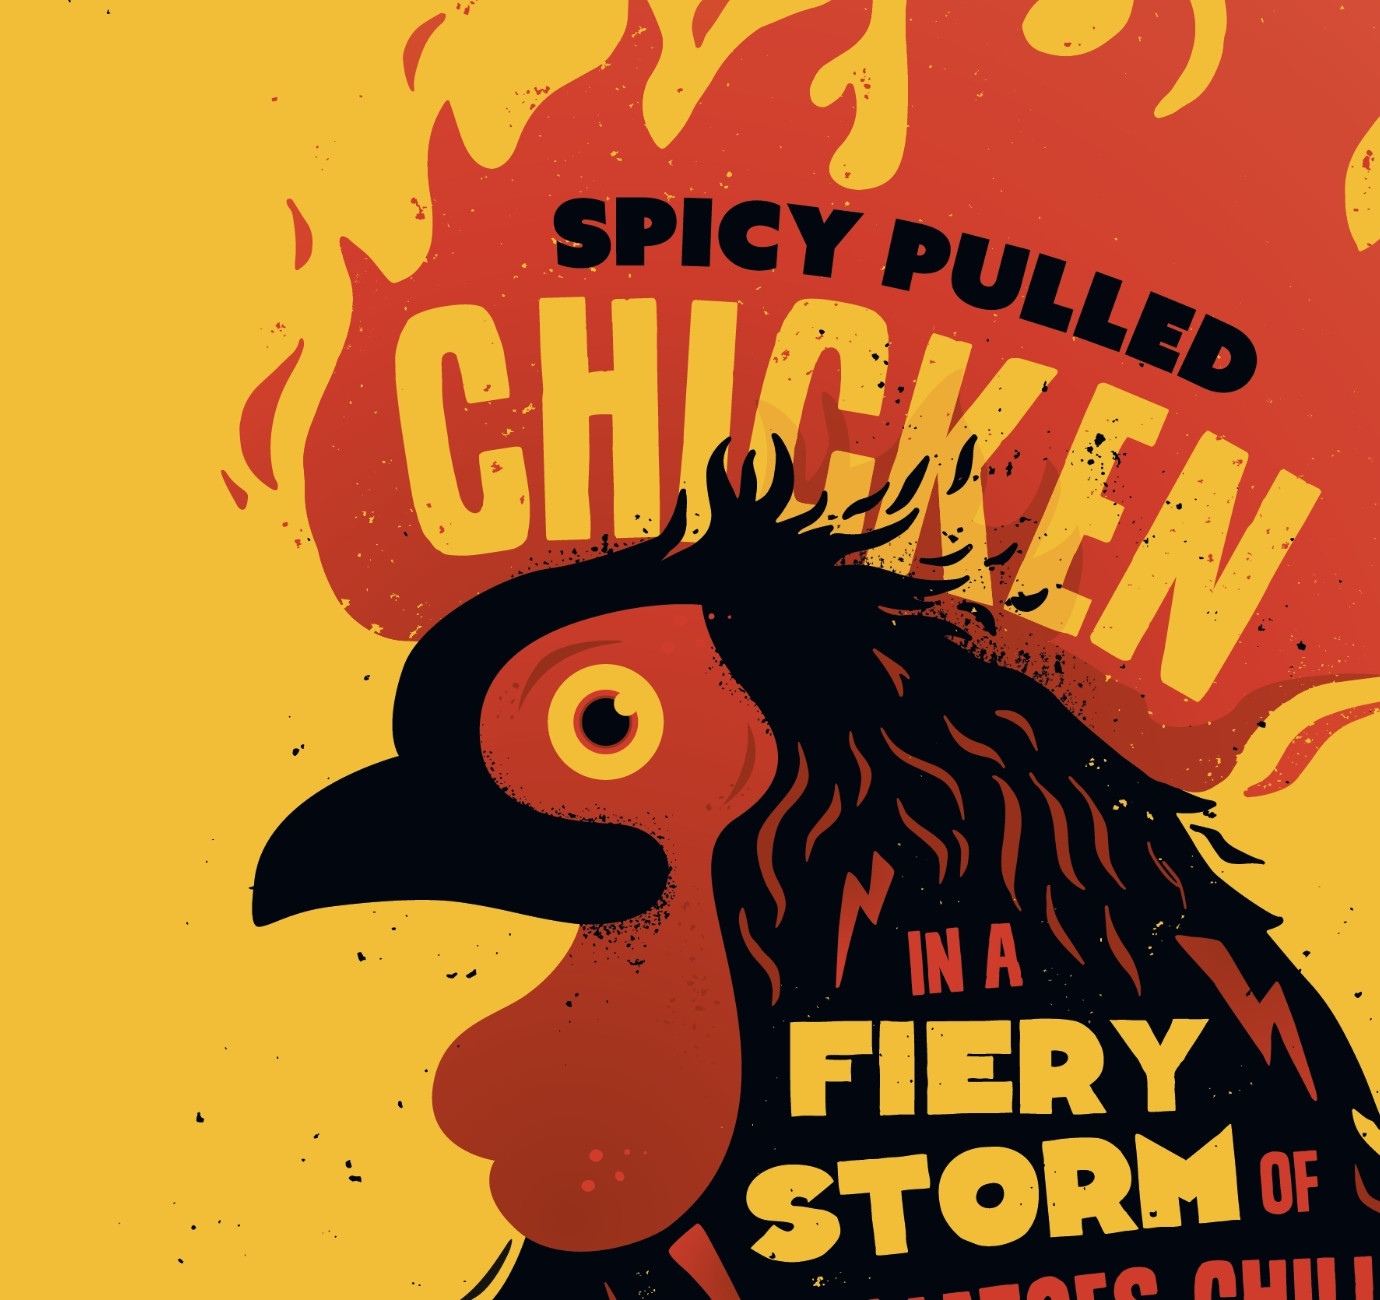 Spicy pulled chicken poster design by Root Studio